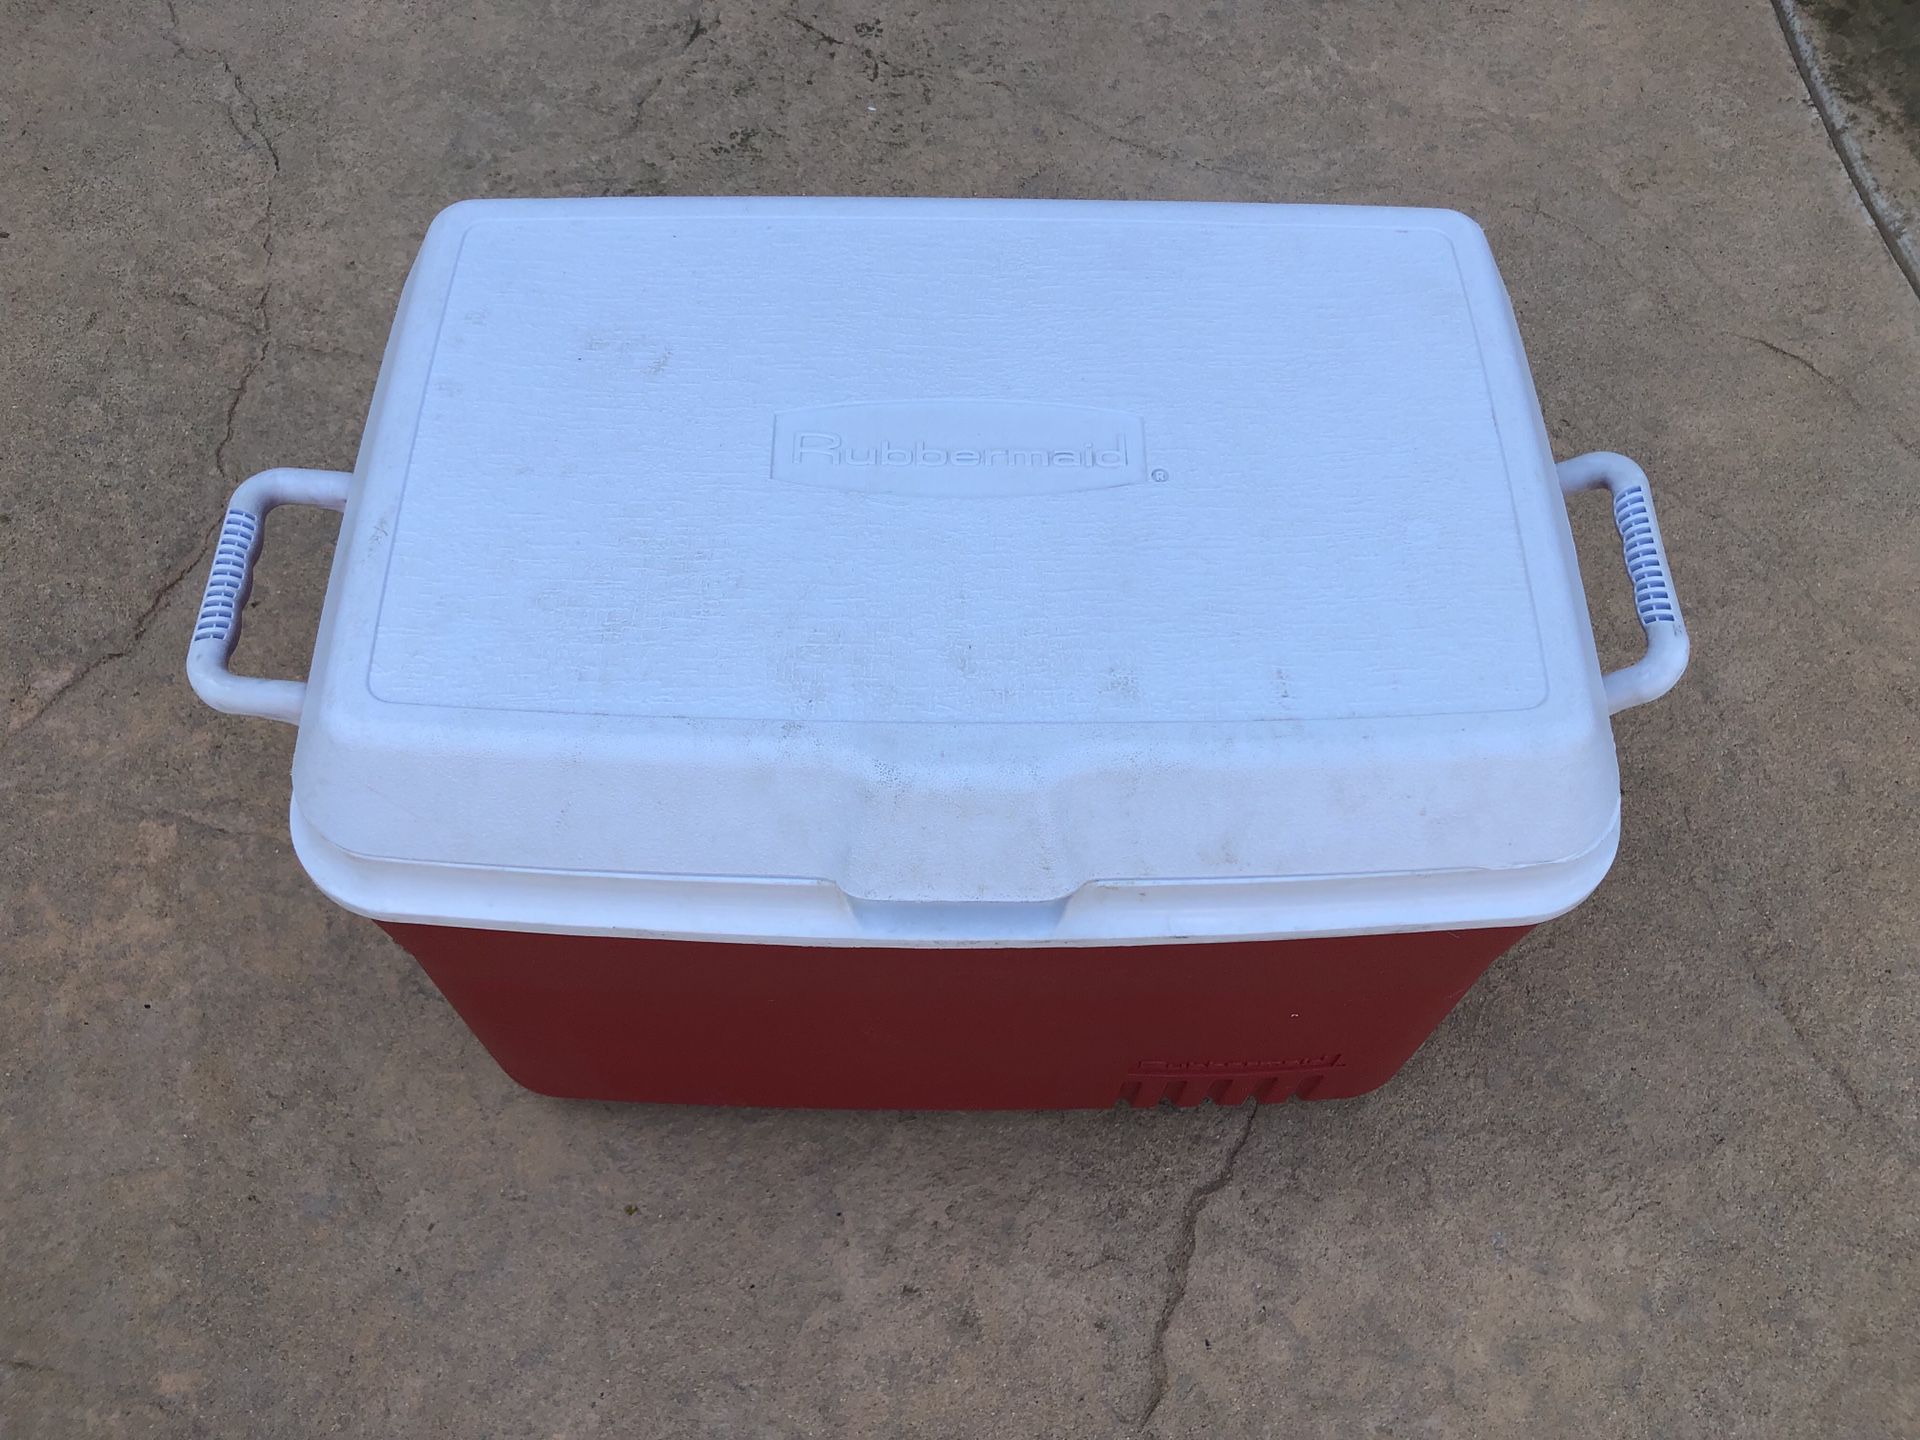 Red & White Rubbermaid Camping or Sports Cooler